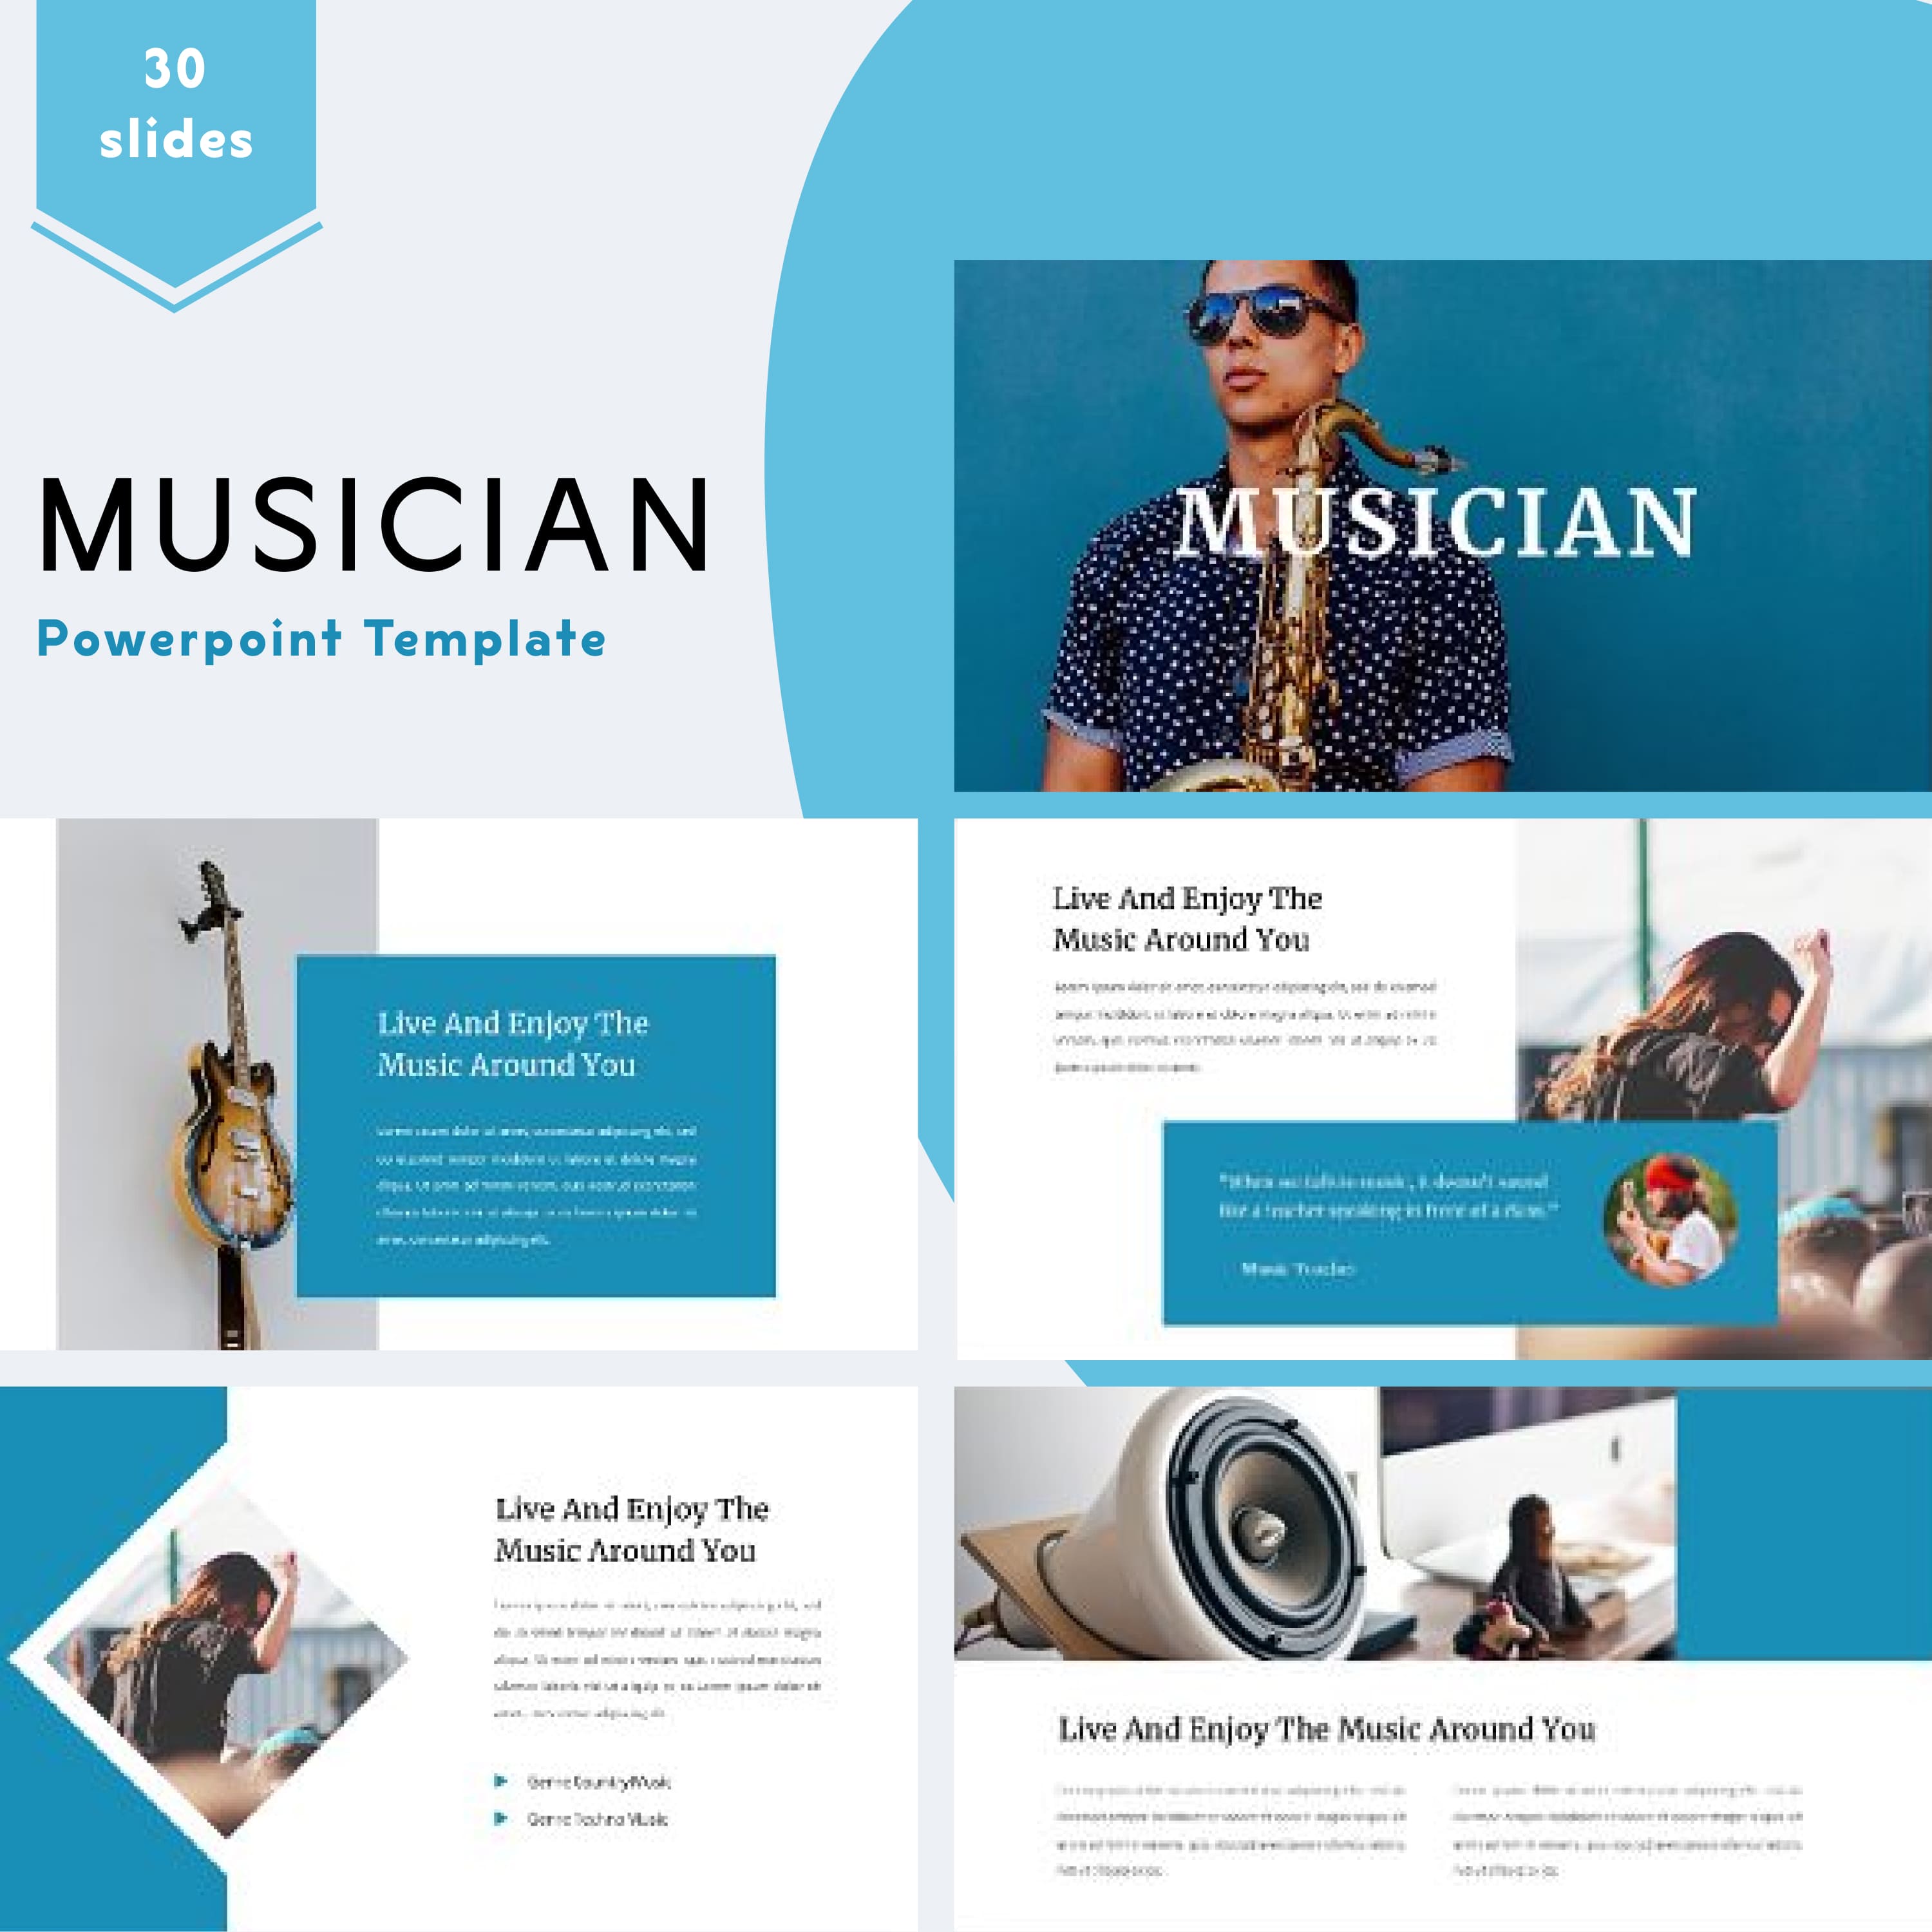 MUSICIAN - Powerpoint Template cover.